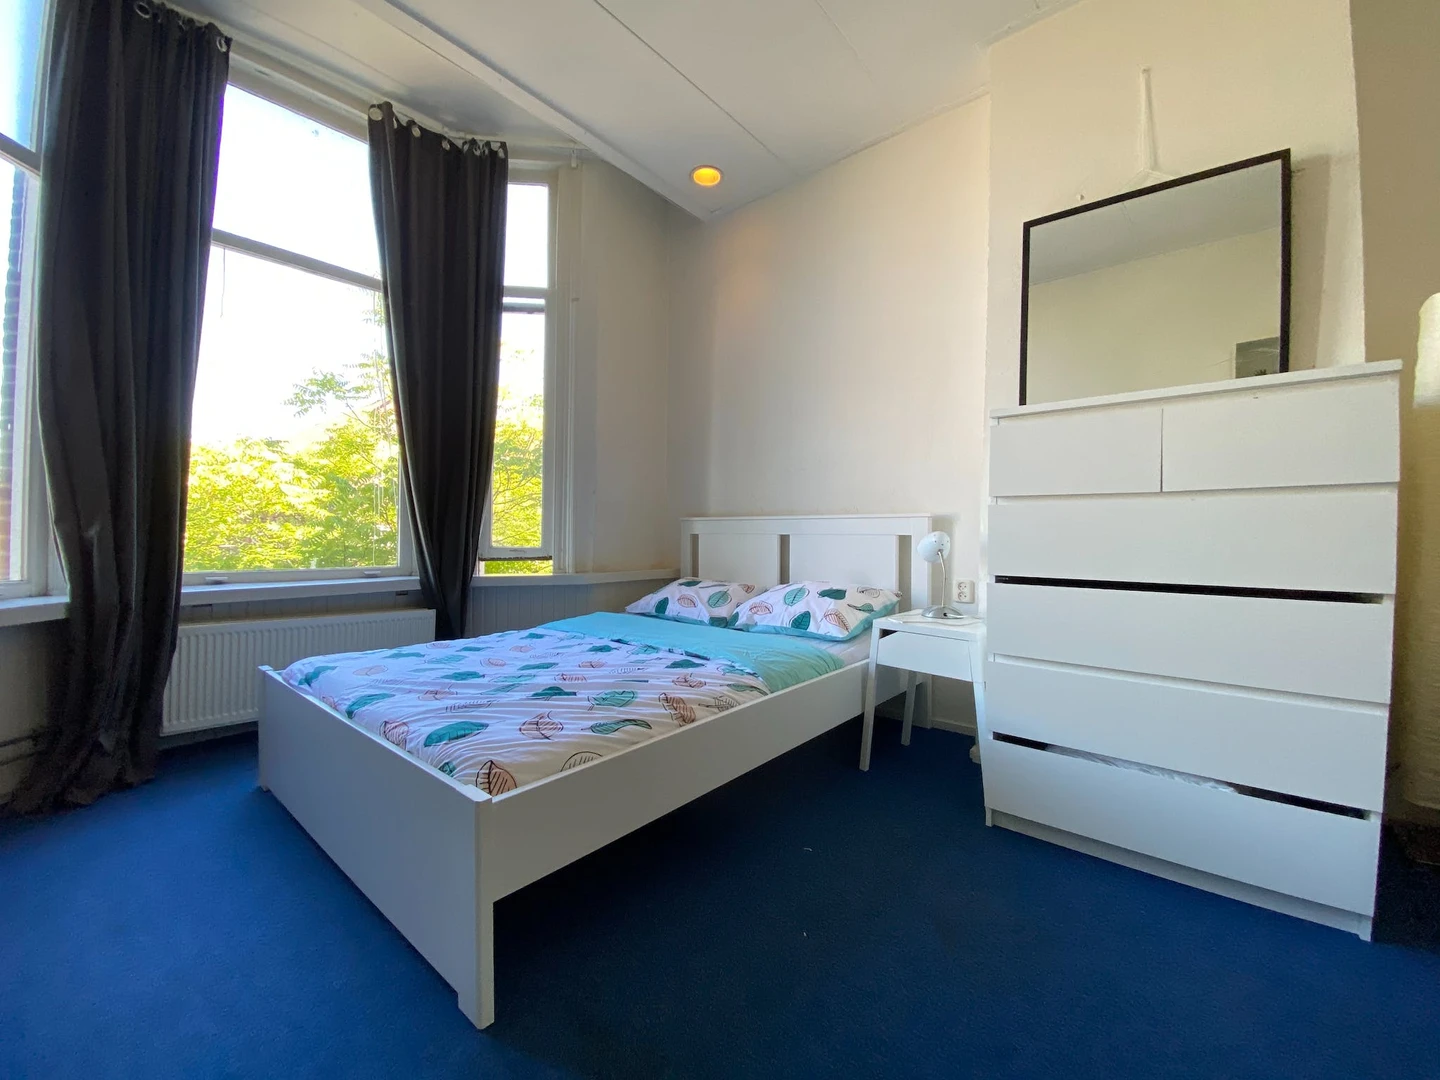 Renting rooms by the month in rotterdam